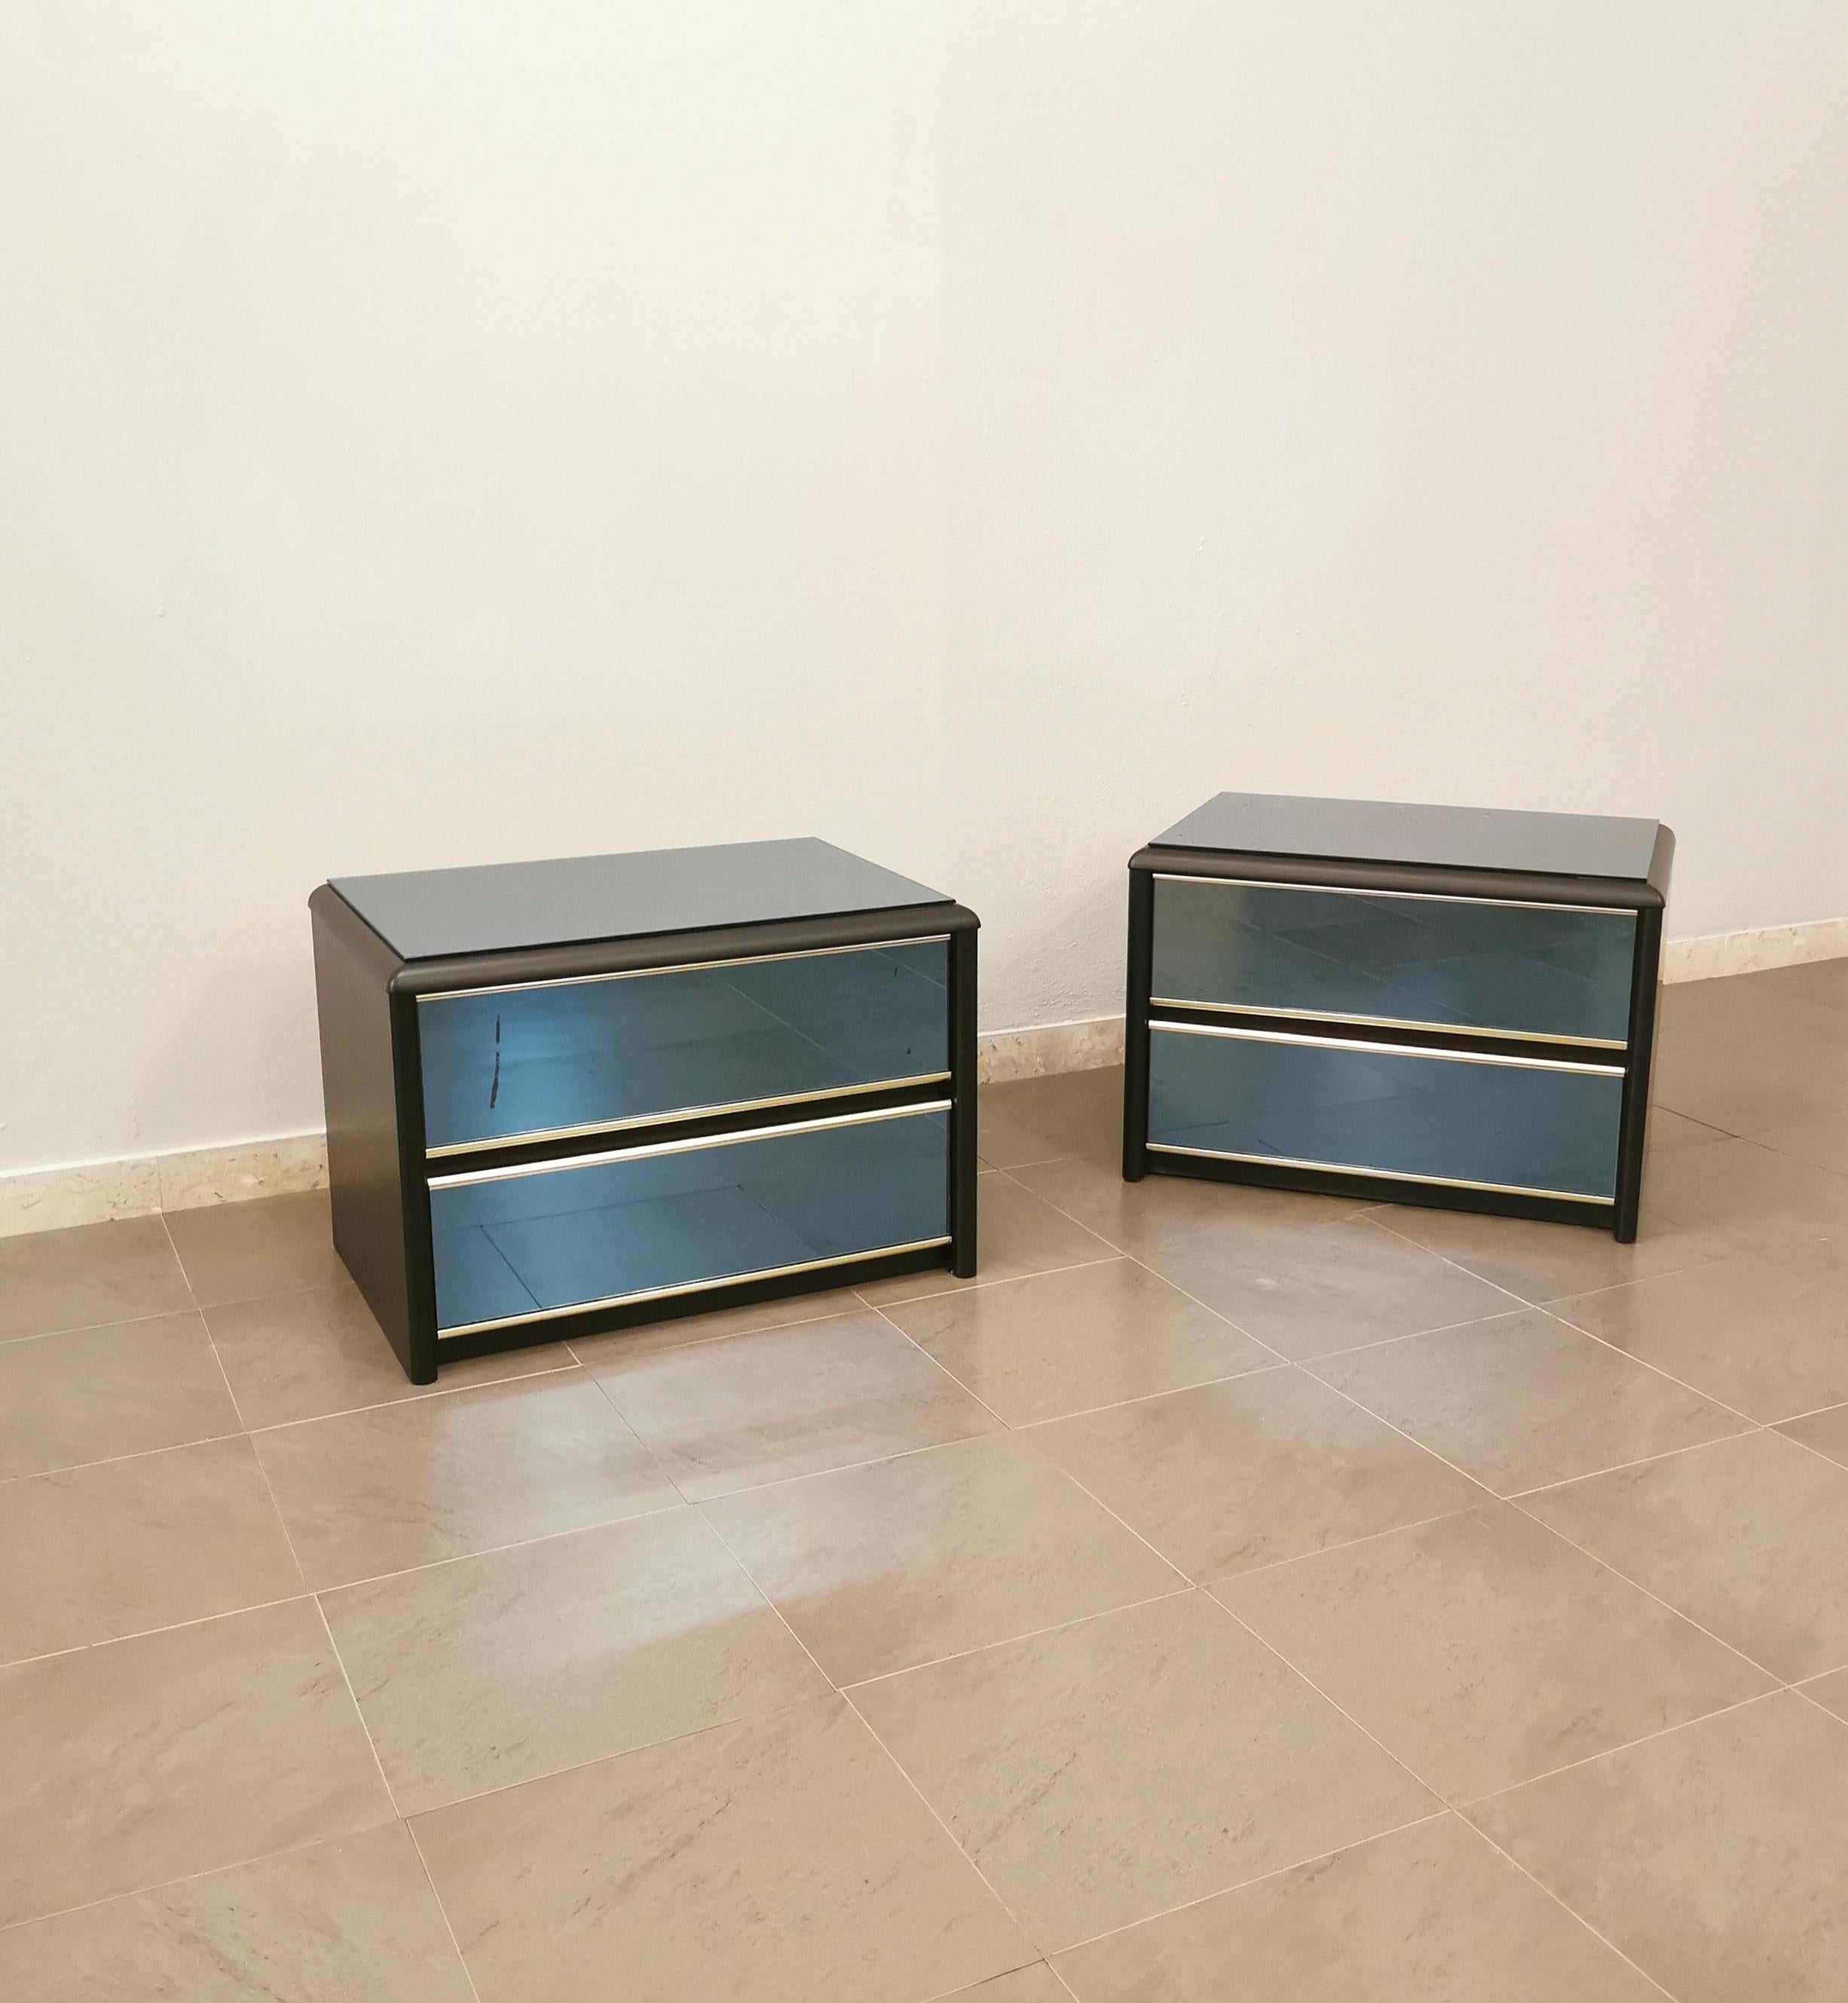 Set of 2 bedside tables by an unknown designer produced in Italy in the 70s. This elegant set has a matte effect black wood structure and rounded edges with cobalt-colored mirrored glass top and drawers and golden aluminum finishes.